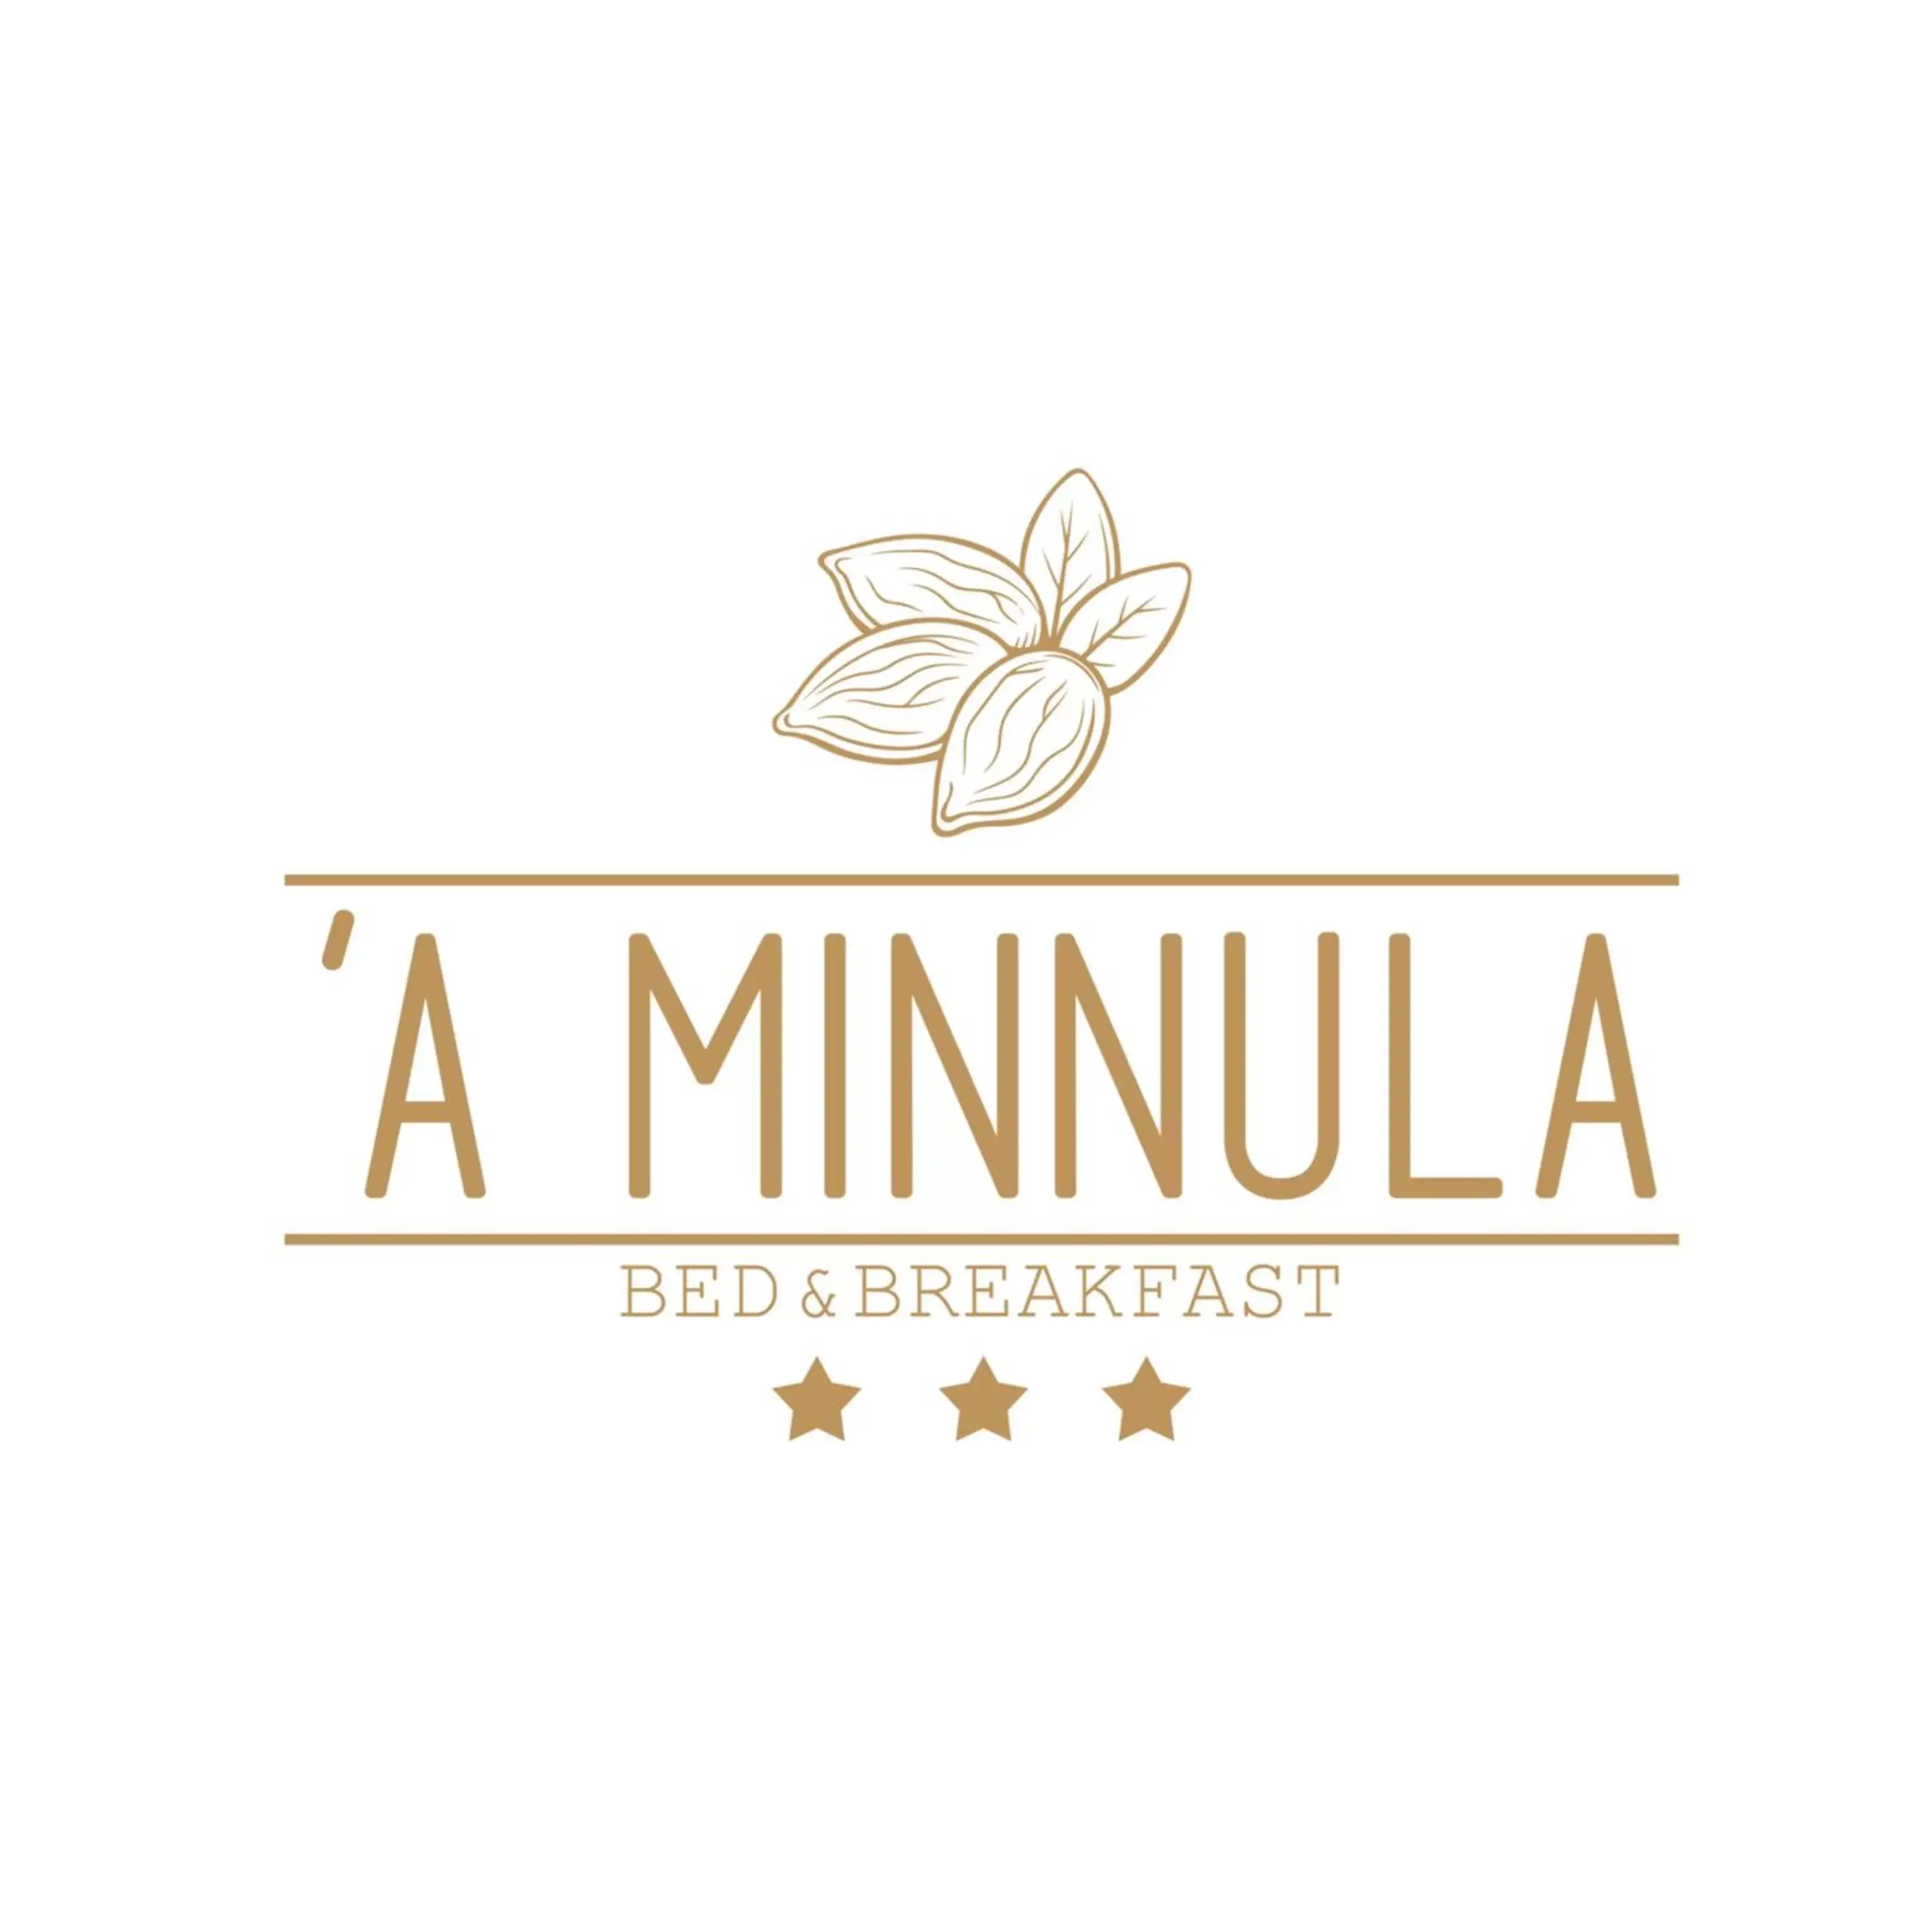 Property logo or sign, Logo/Certificate/Sign/Award in ‘A Minnula